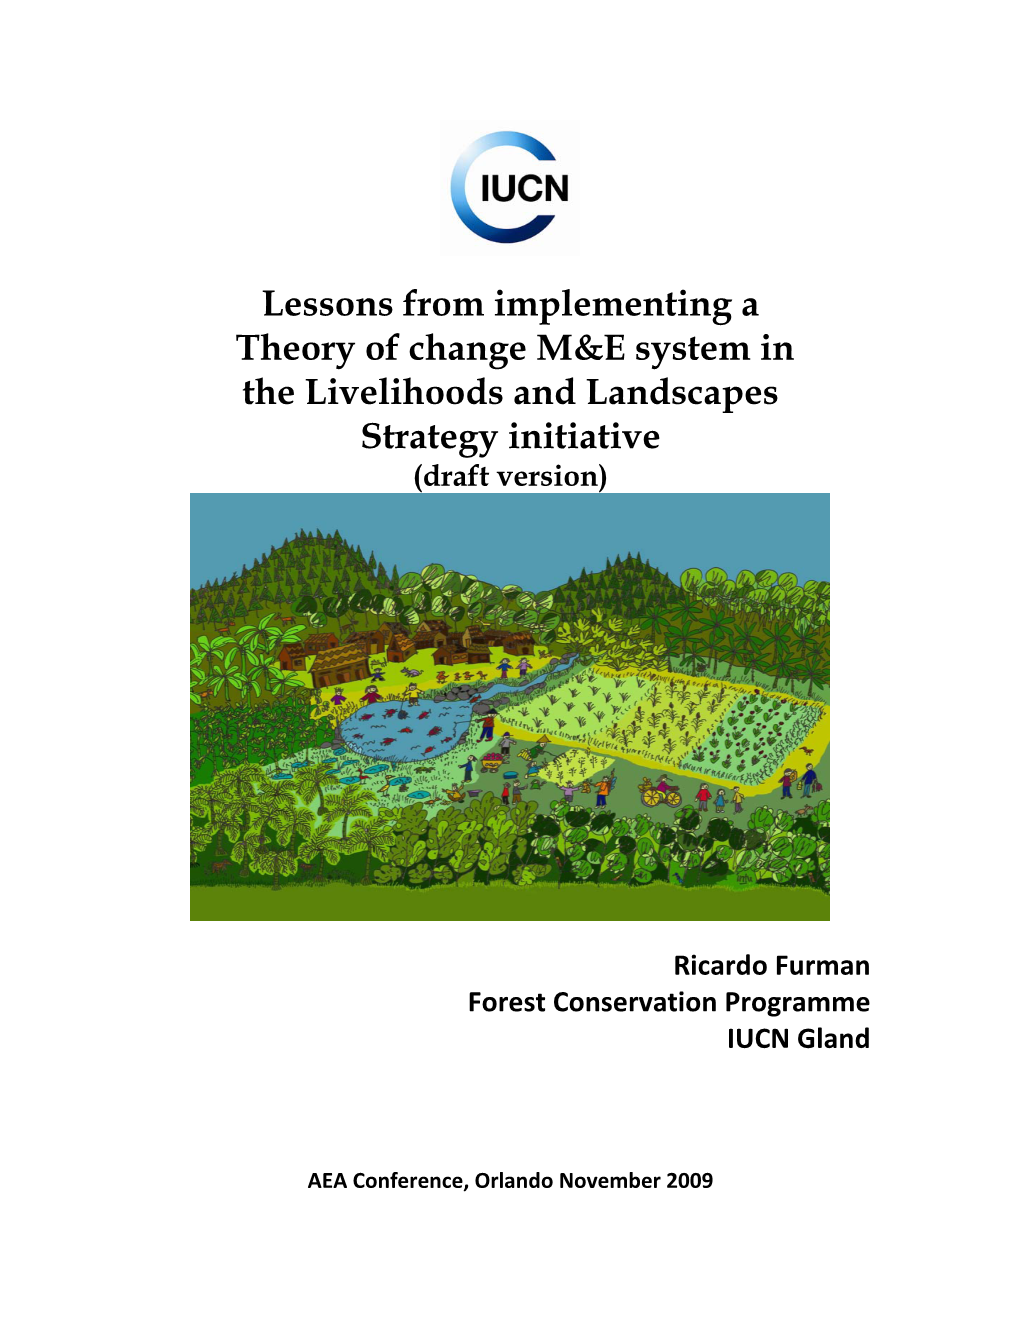 Lessons from Implementing a Theory of Change M&E System in the Livelihoods and Landscapes Strategy Initiative